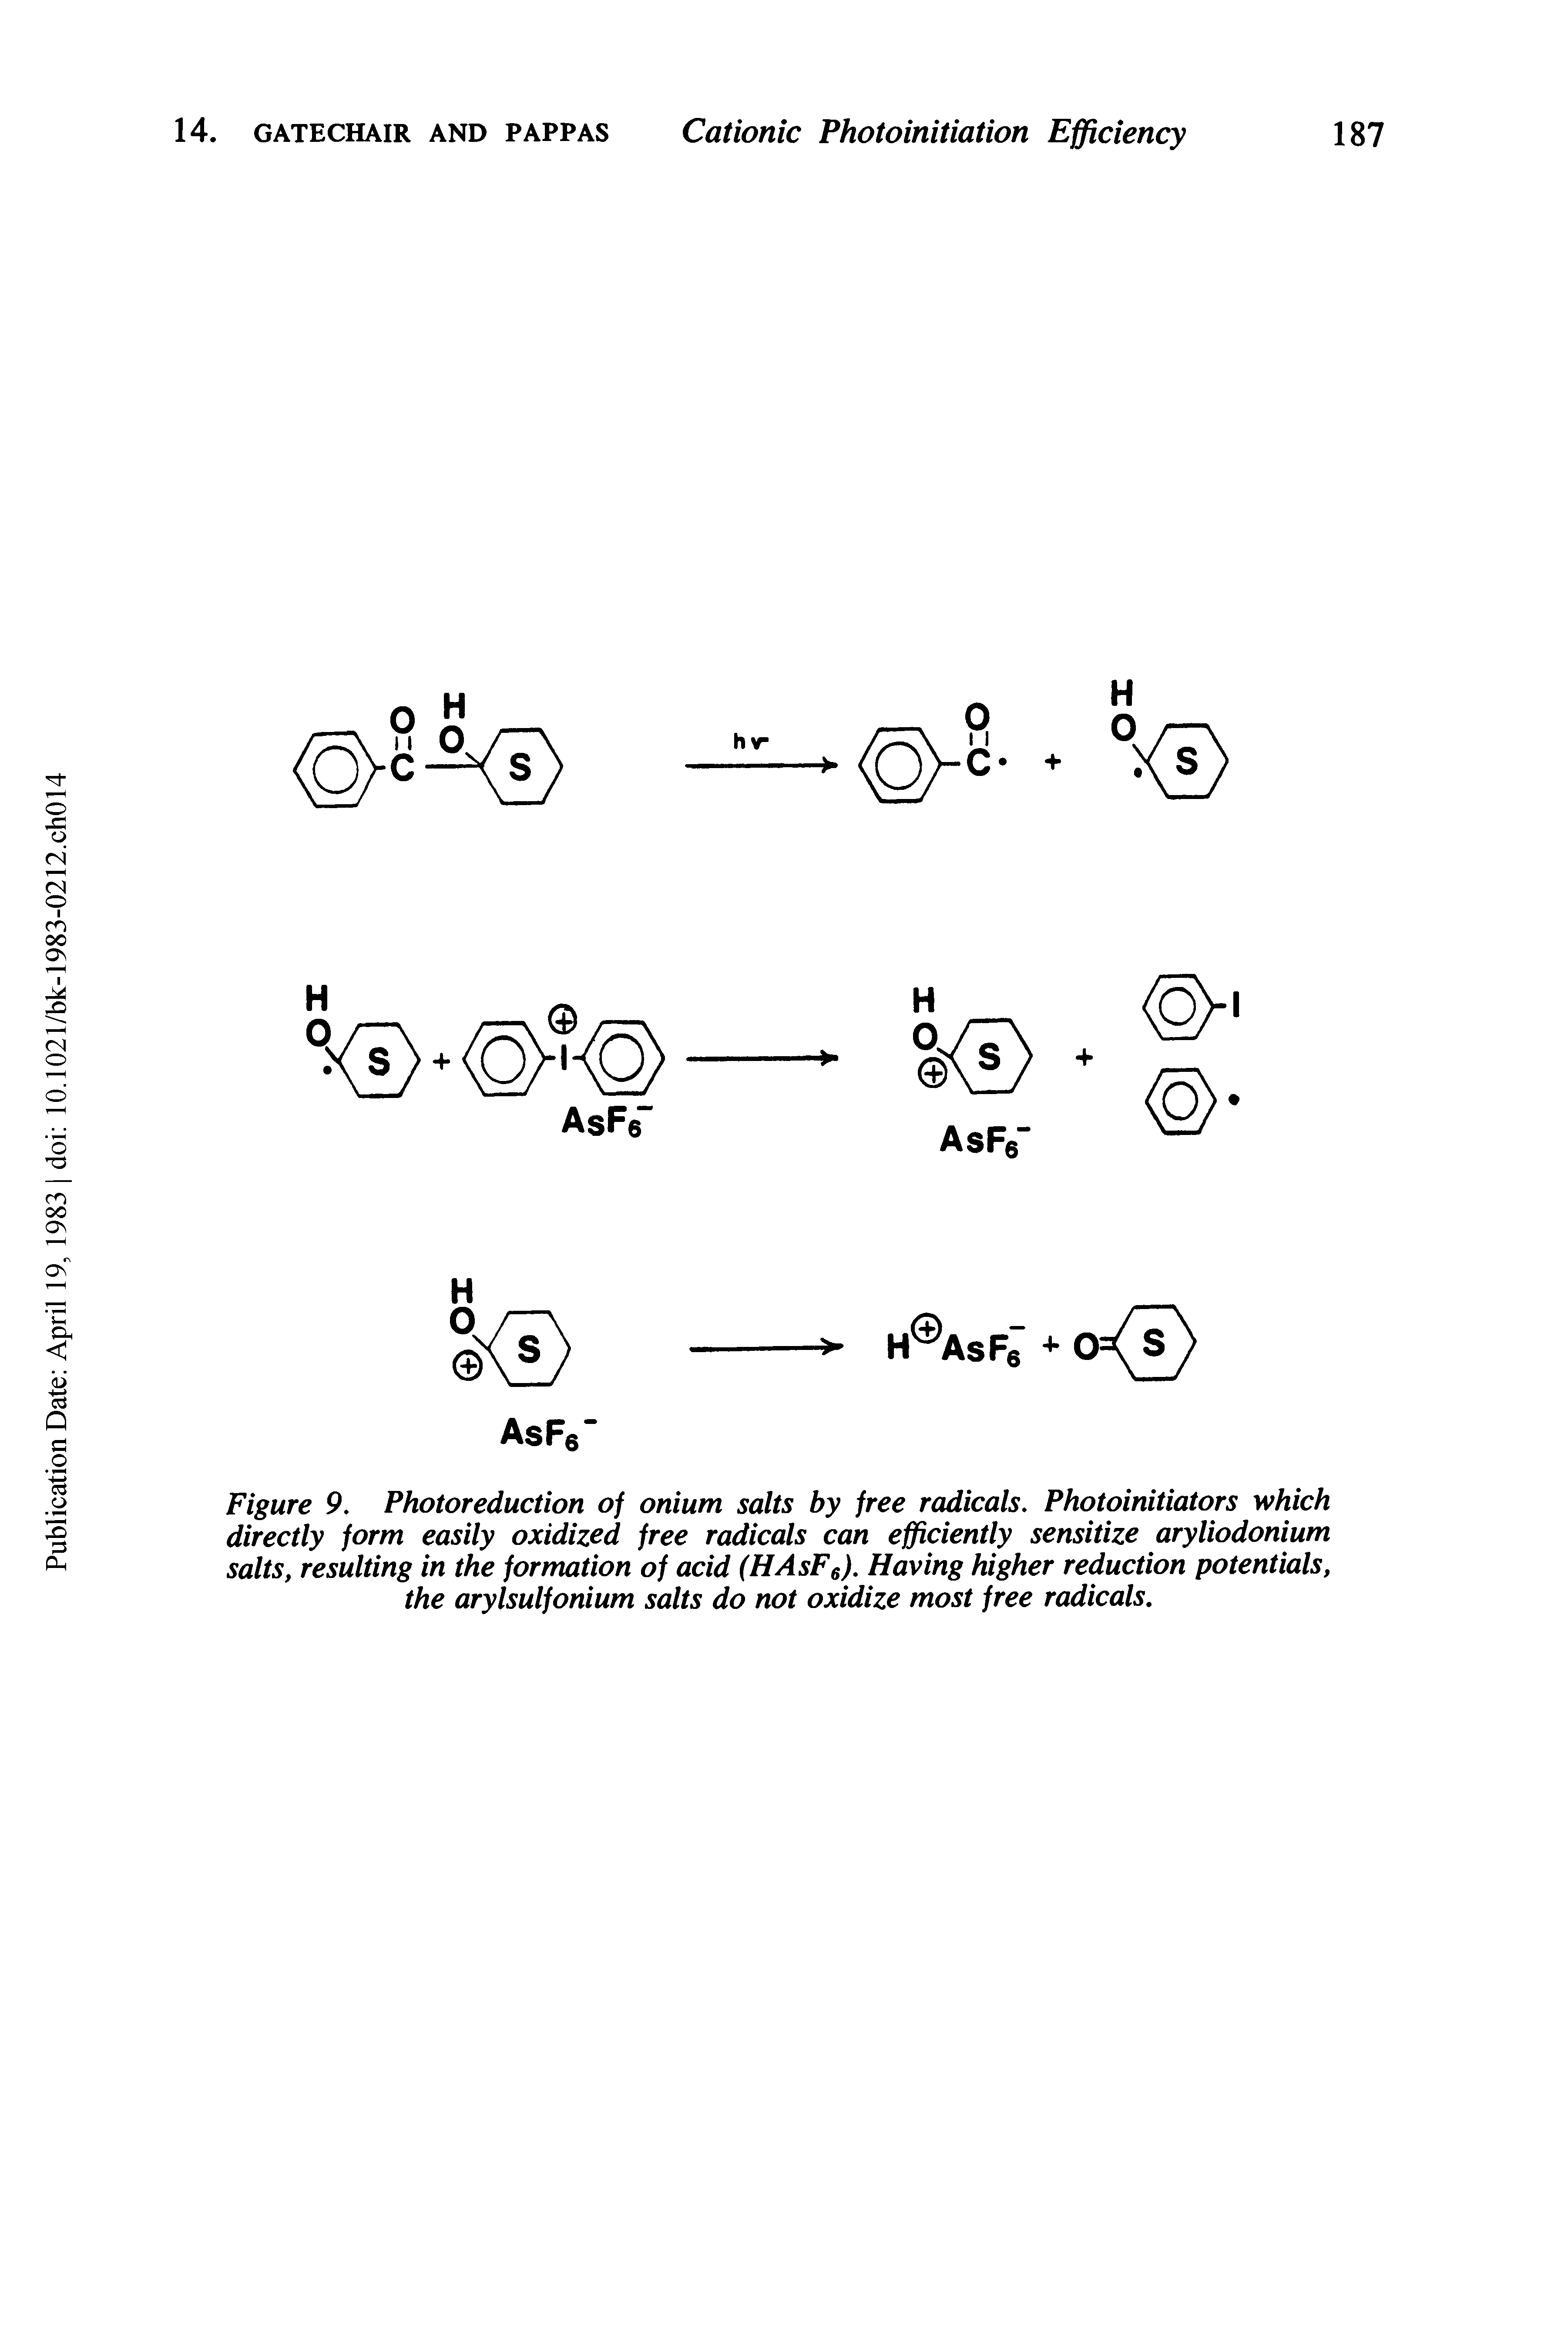 Figure 9. Photoreduction of onium salts by free radicals. Photoinitiators which directly form easily oxidized free radicals can efficiently sensitize aryliodonium salts, resulting in the formation of acid (HAsP ). Having higher reduction potentials, the arylsulfonium salts do not oxidize most free radicals.